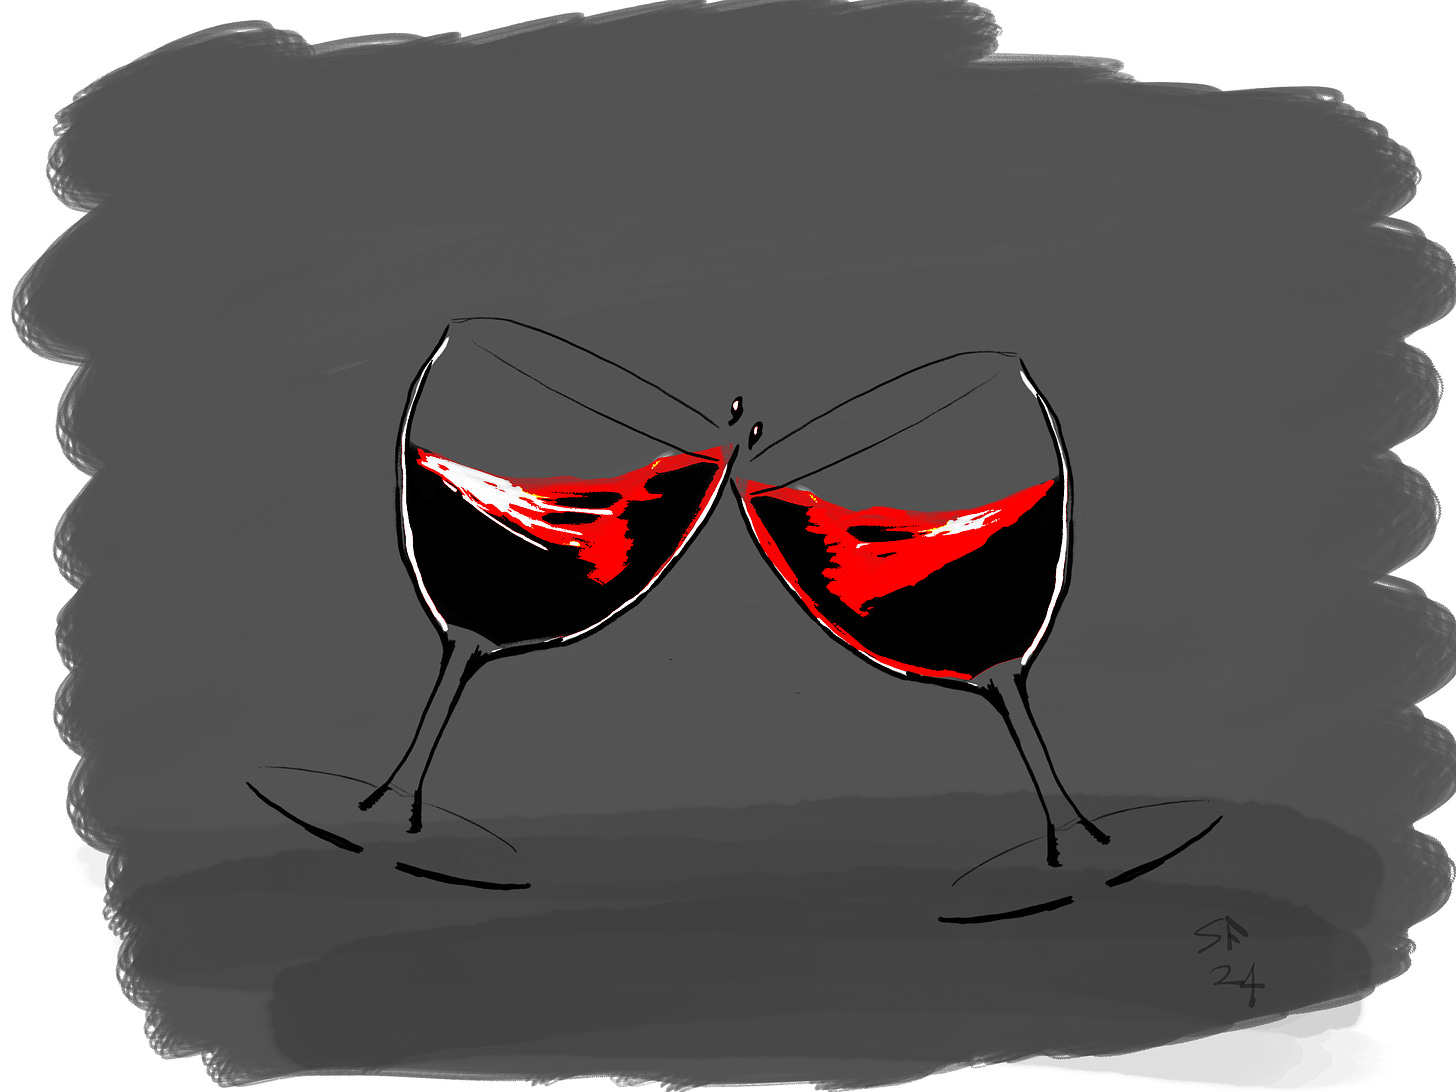 Cartoon: two glasses of red wine clinking together